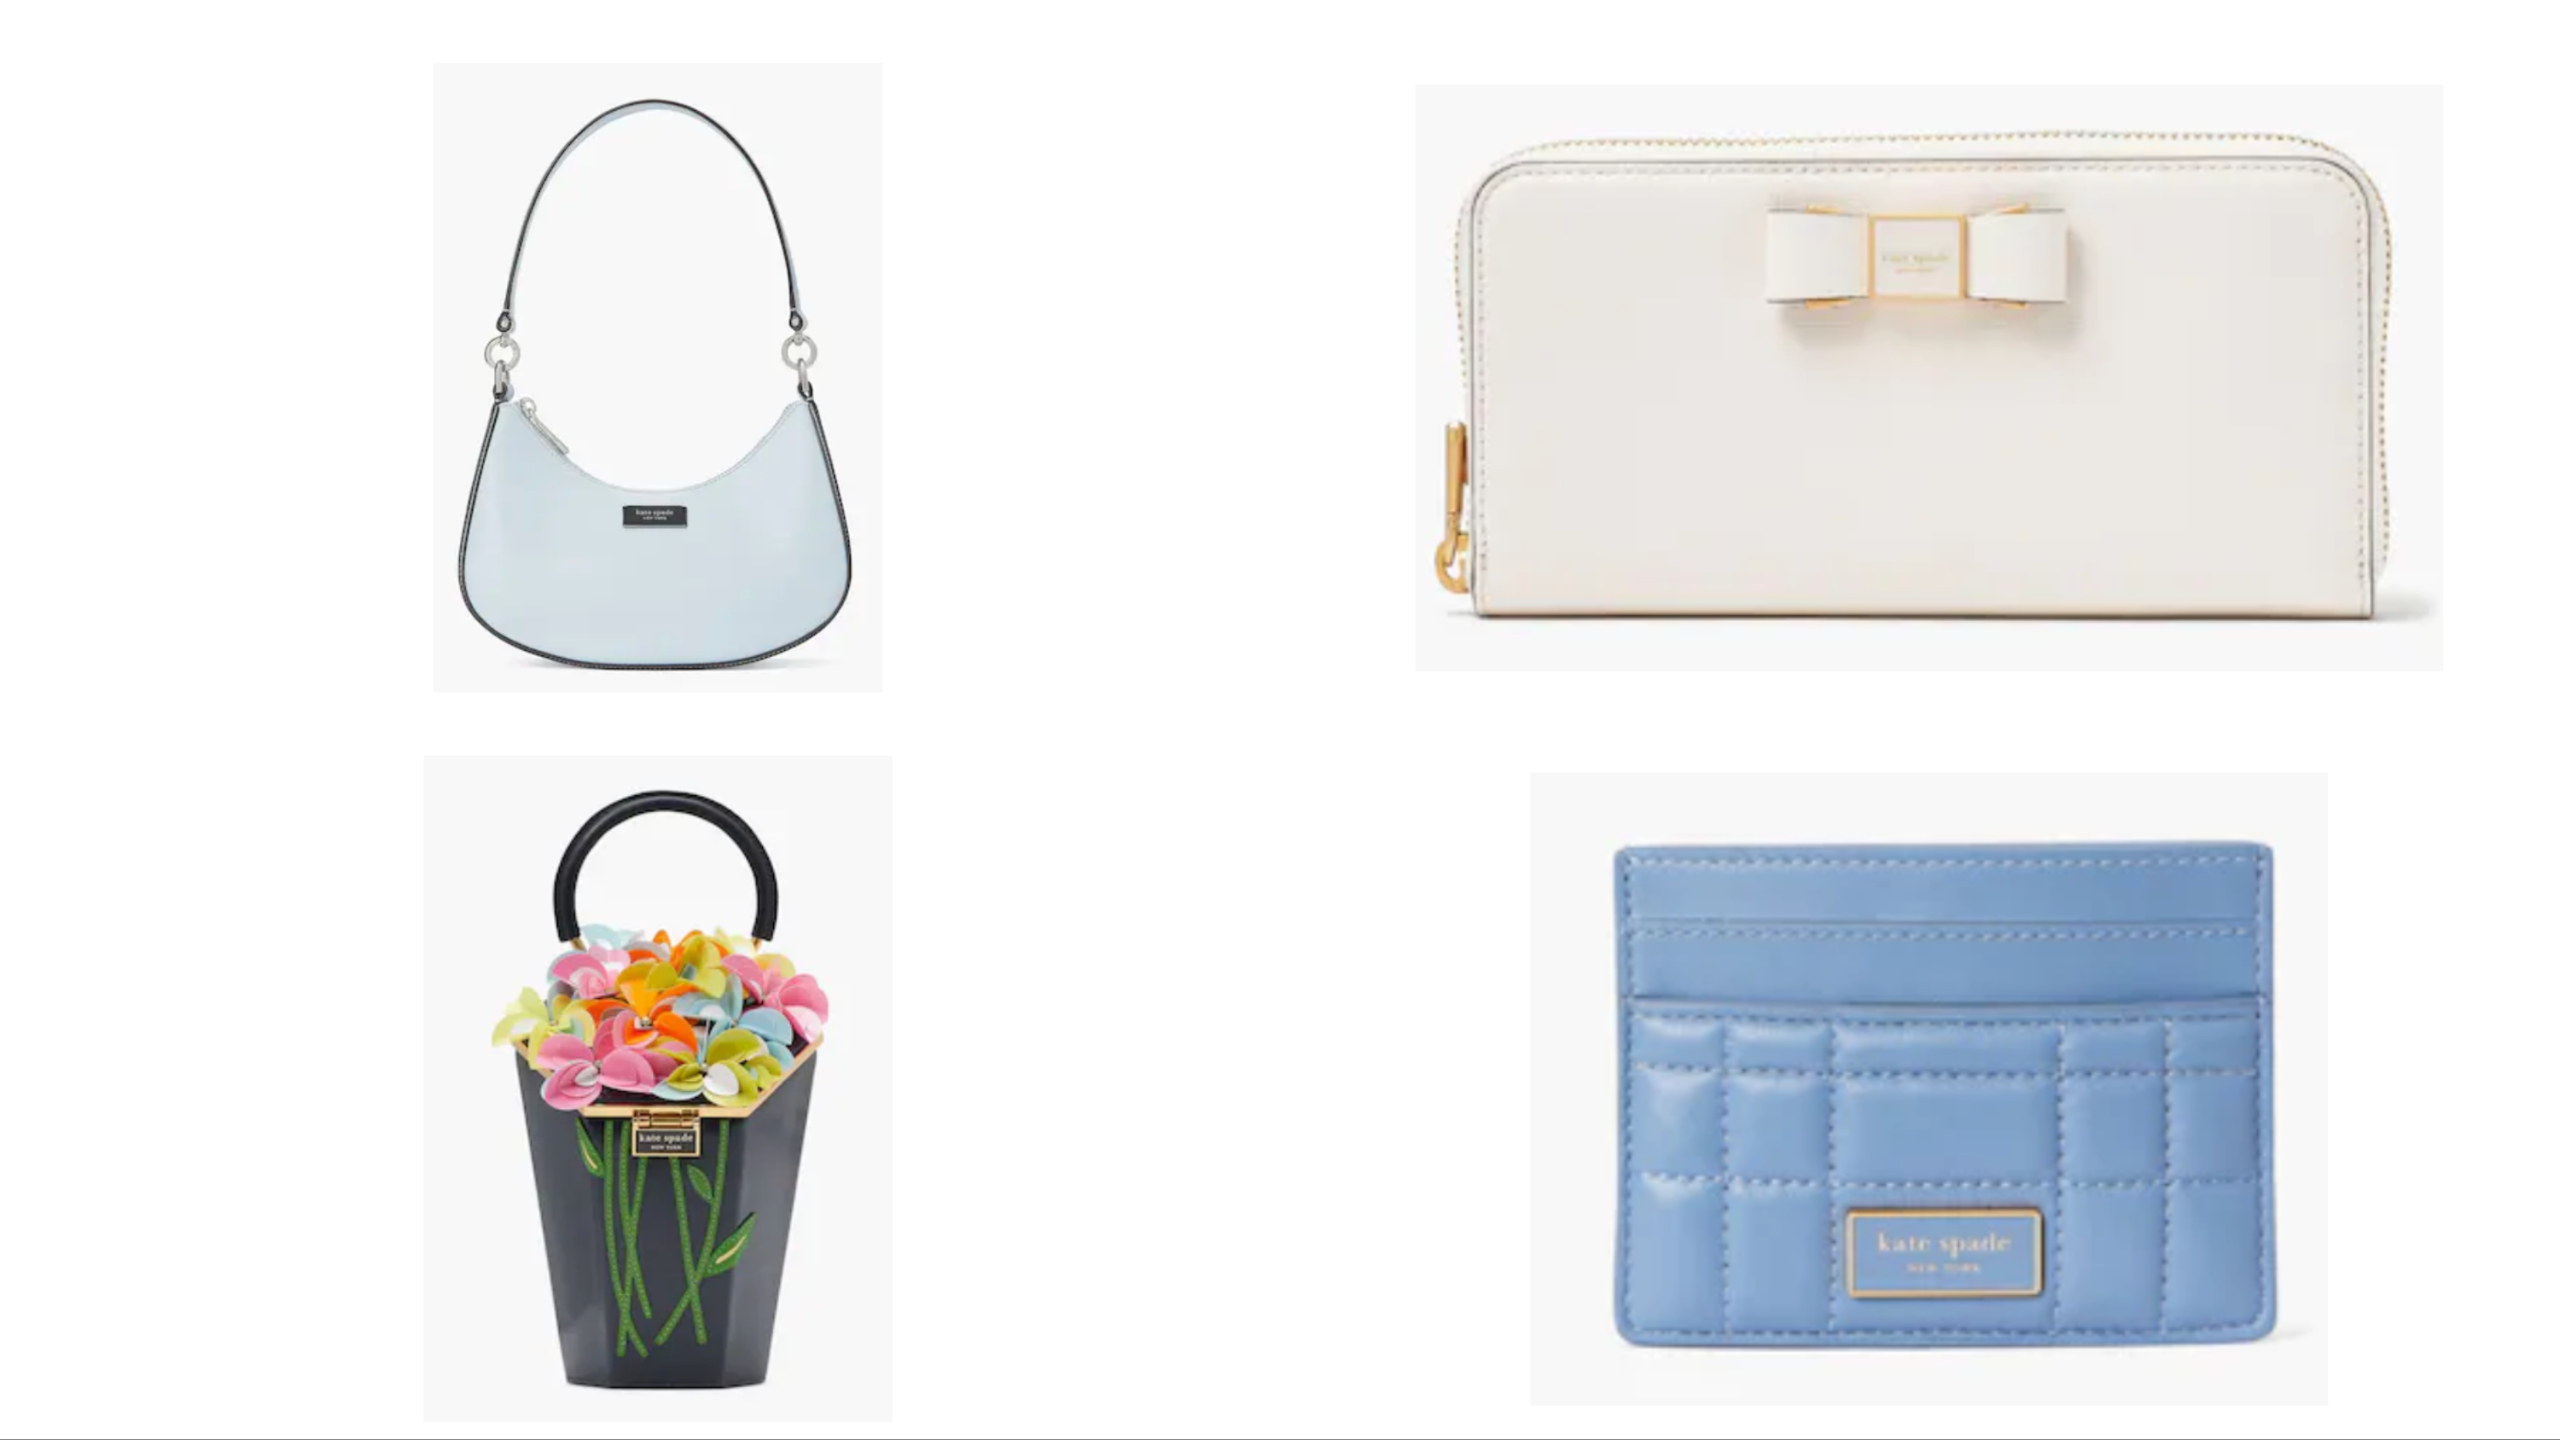 Kate Spade sale: Get up 30% off purses, clothing and shoes 